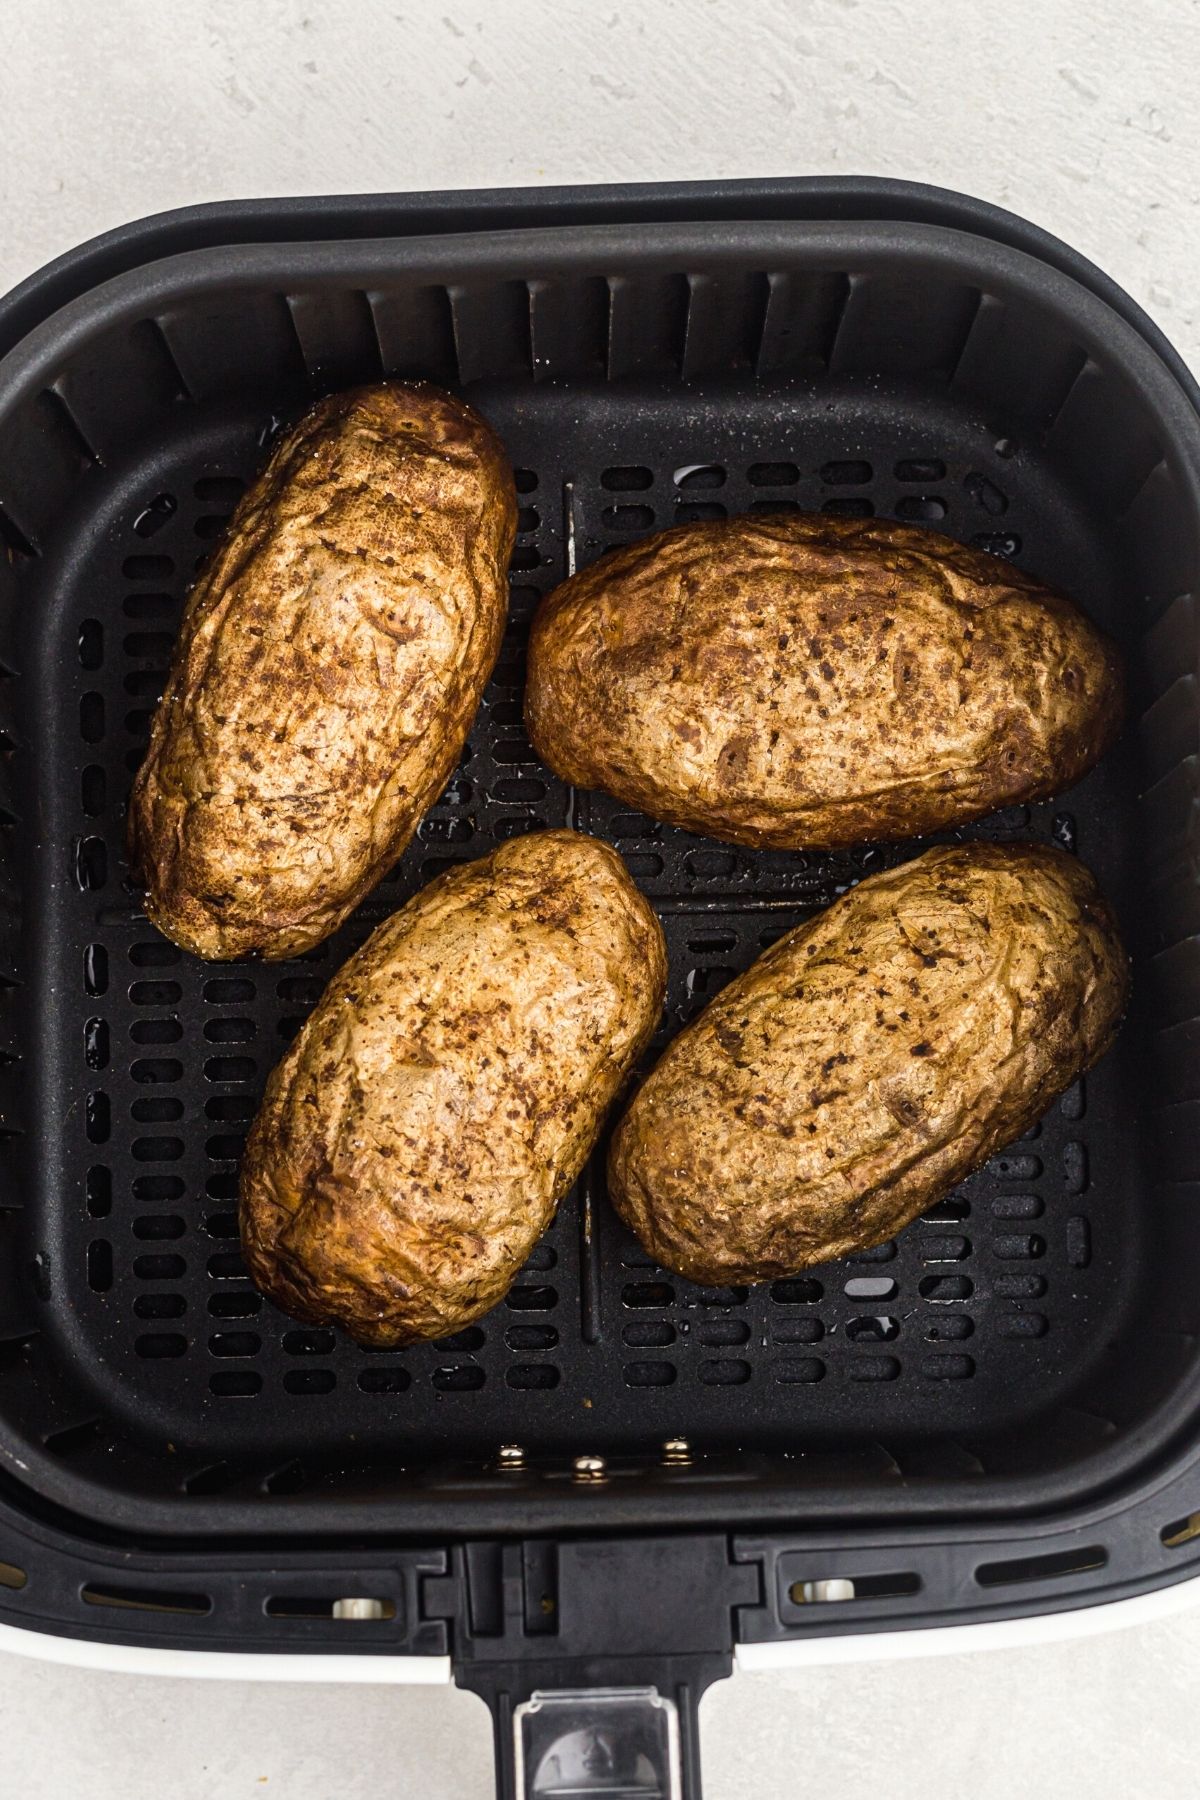 Four potatoes in the air fryer basket after being cooked.